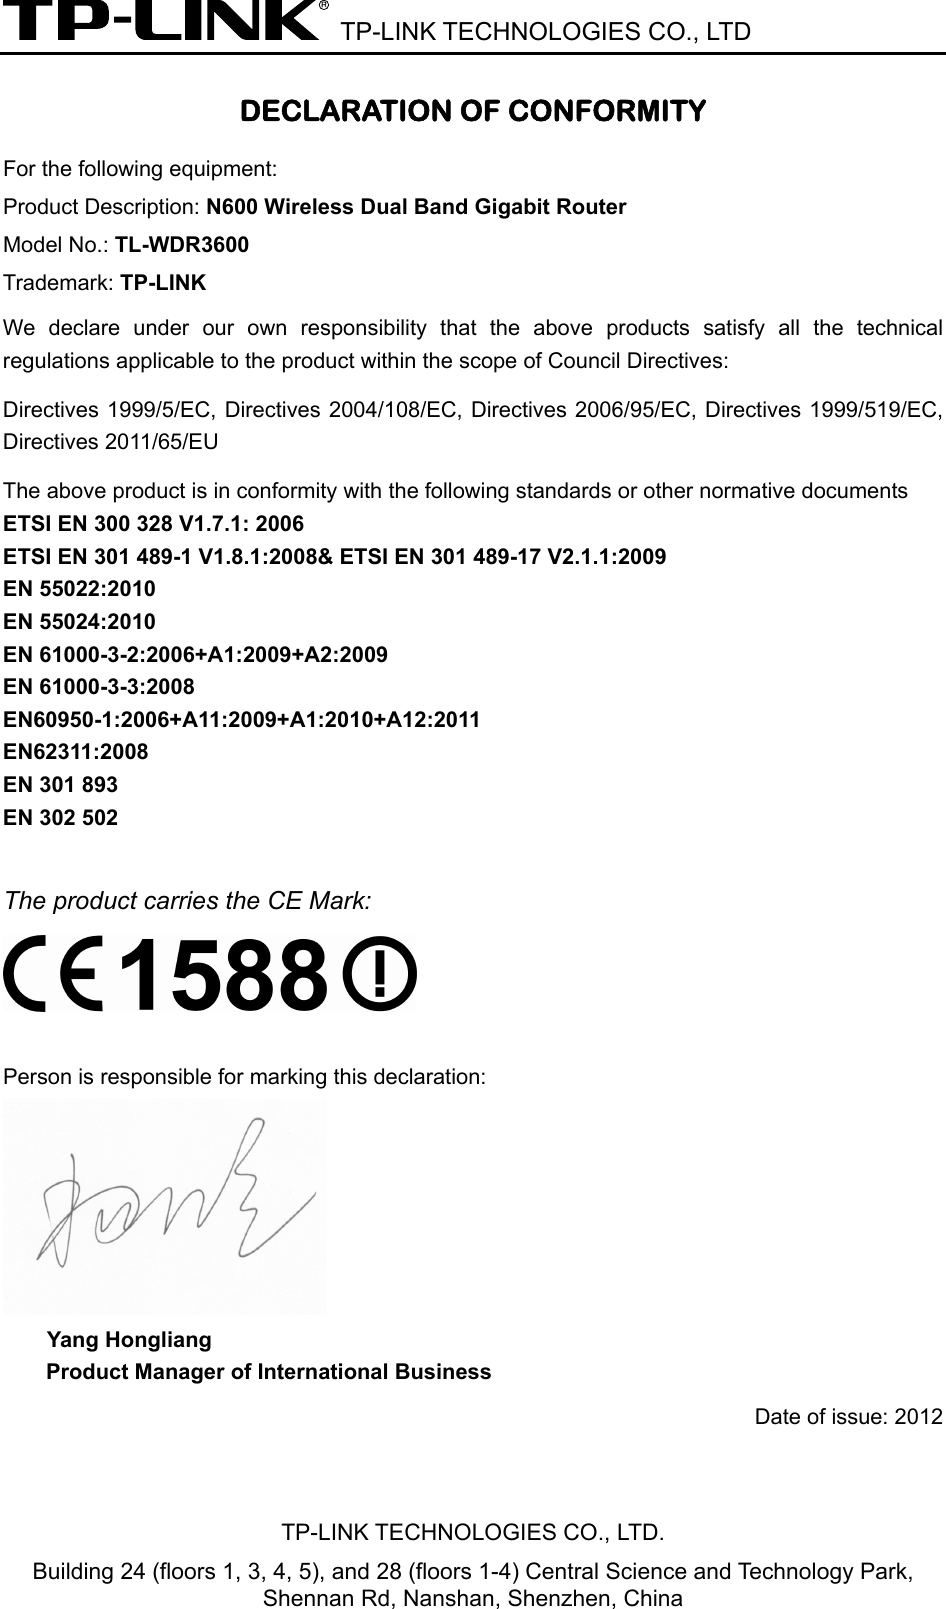  TP-LINK TECHNOLOGIES CO., LTD DECLARATION OF CONFORMITY For the following equipment: Product Description: N600 Wireless Dual Band Gigabit Router Model No.: TL-WDR3600 Trademark: TP-LINK We declare under our own responsibility that the above products satisfy all the technical regulations applicable to the product within the scope of Council Directives:     Directives 1999/5/EC, Directives 2004/108/EC, Directives 2006/95/EC, Directives 1999/519/EC, Directives 2011/65/EU The above product is in conformity with the following standards or other normative documents ETSI EN 300 328 V1.7.1: 2006 ETSI EN 301 489-1 V1.8.1:2008&amp; ETSI EN 301 489-17 V2.1.1:2009 EN 55022:2010 EN 55024:2010 EN 61000-3-2:2006+A1:2009+A2:2009 EN 61000-3-3:2008 EN60950-1:2006+A11:2009+A1:2010+A12:2011 EN62311:2008 EN 301 893 EN 302 502  The product carries the CE Mark:   Person is responsible for marking this declaration:  Yang Hongliang Product Manager of International Business   Date of issue: 2012 TP-LINK TECHNOLOGIES CO., LTD. Building 24 (floors 1, 3, 4, 5), and 28 (floors 1-4) Central Science and Technology Park, Shennan Rd, Nanshan, Shenzhen, China 